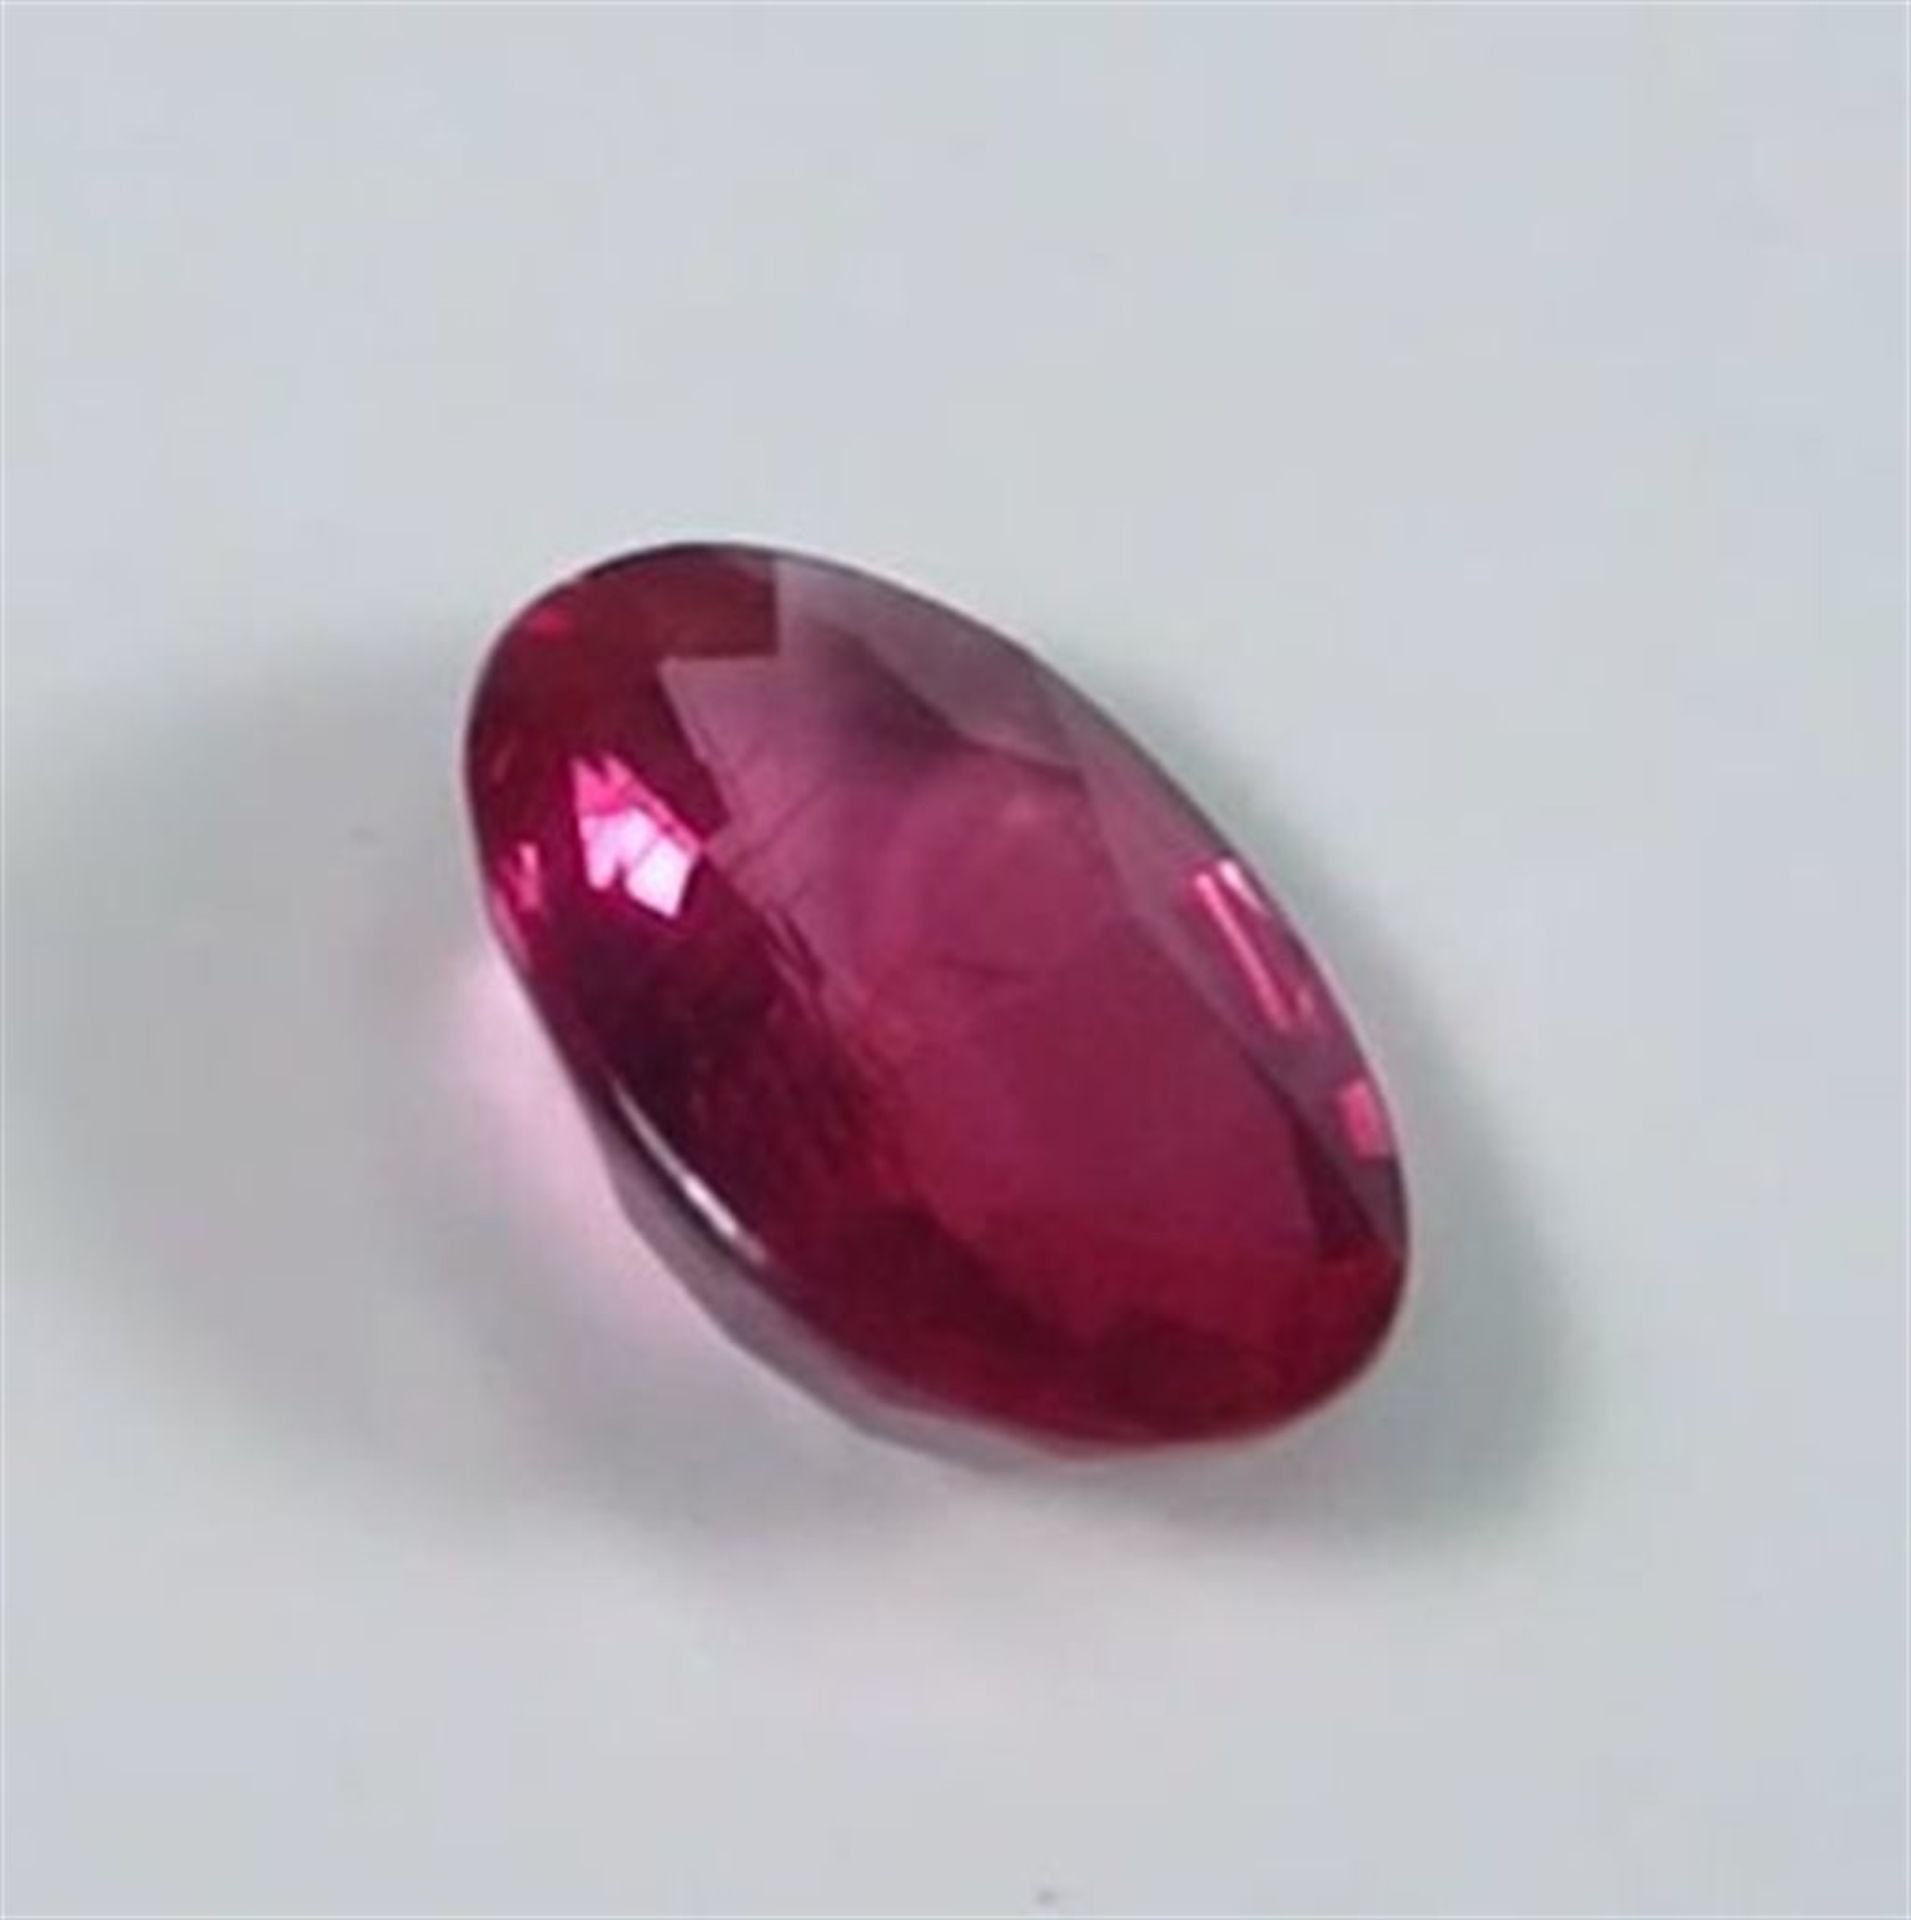 GIA Certified 1.22 ct. Untreated Ruby - BURMA - Image 9 of 10